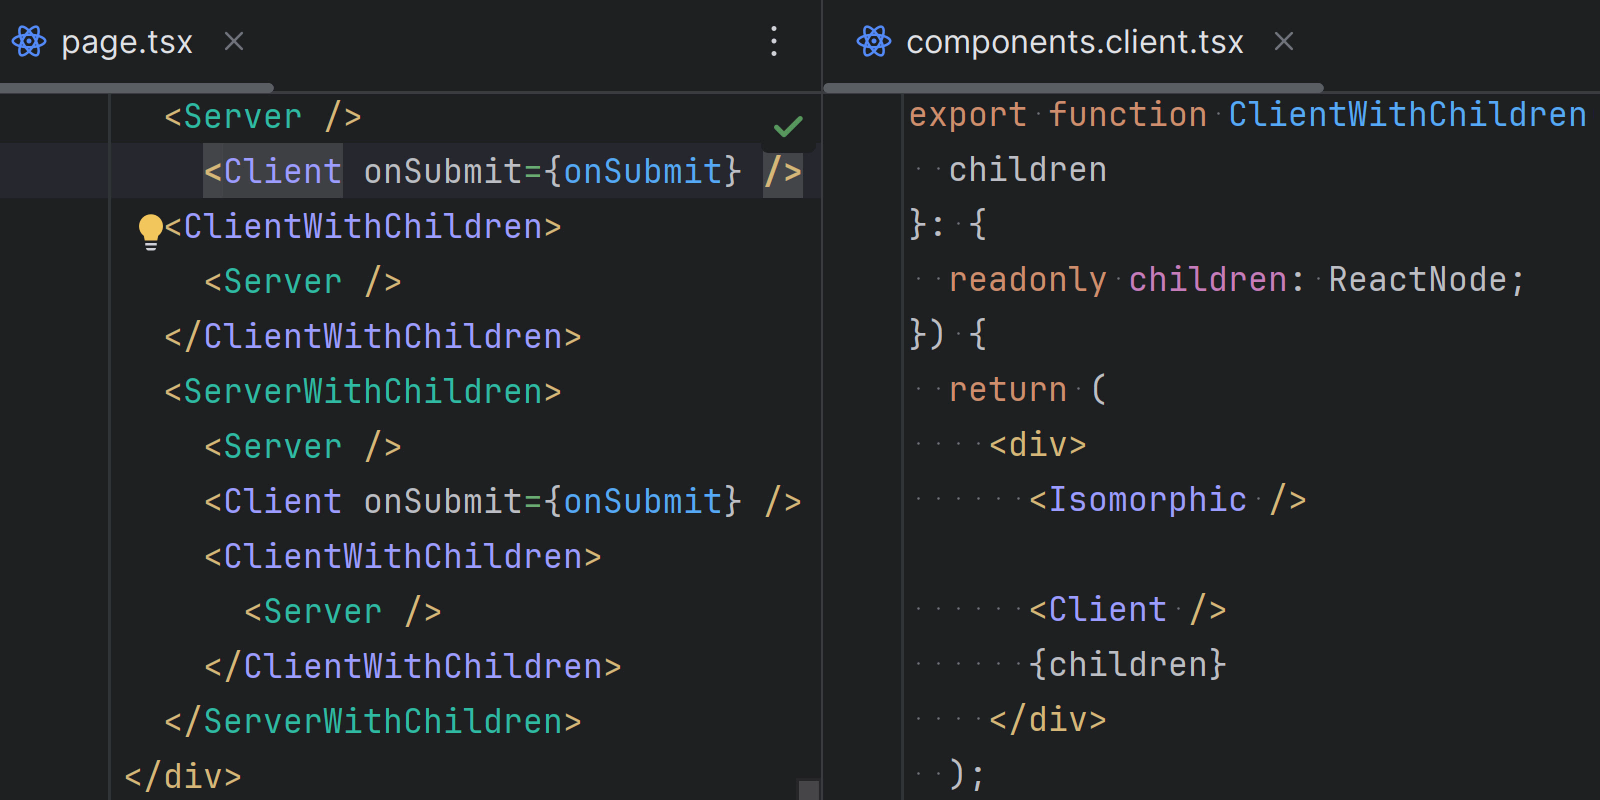 Image showing the different syntax highlighting for client and server components in both dark and light theme